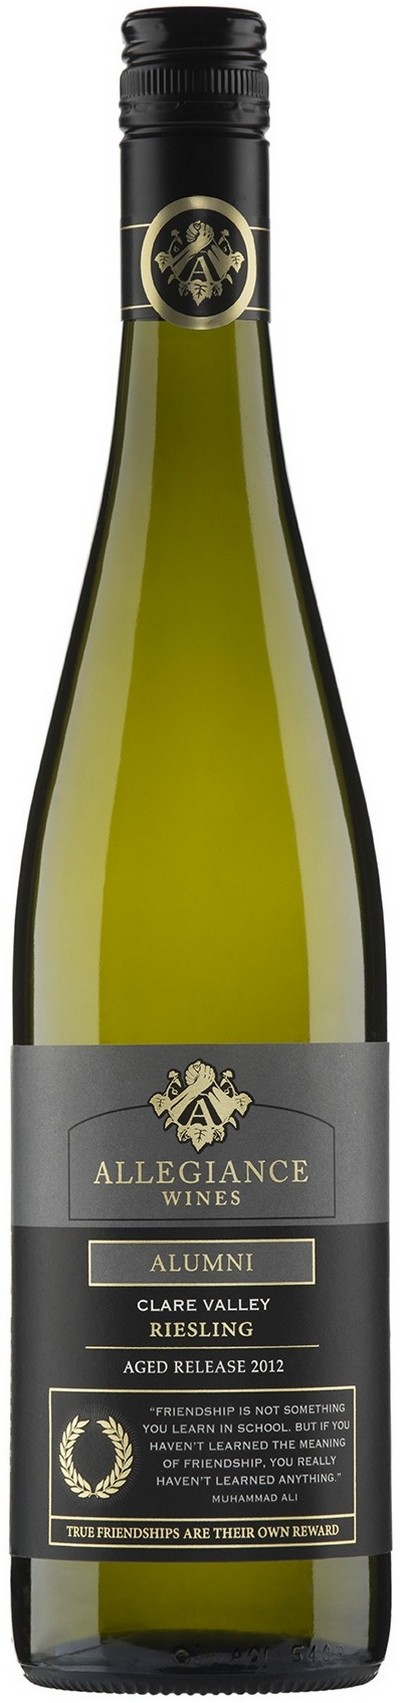 allegiance-wines-alumni-aged-release-clare-valley-riesling-2012